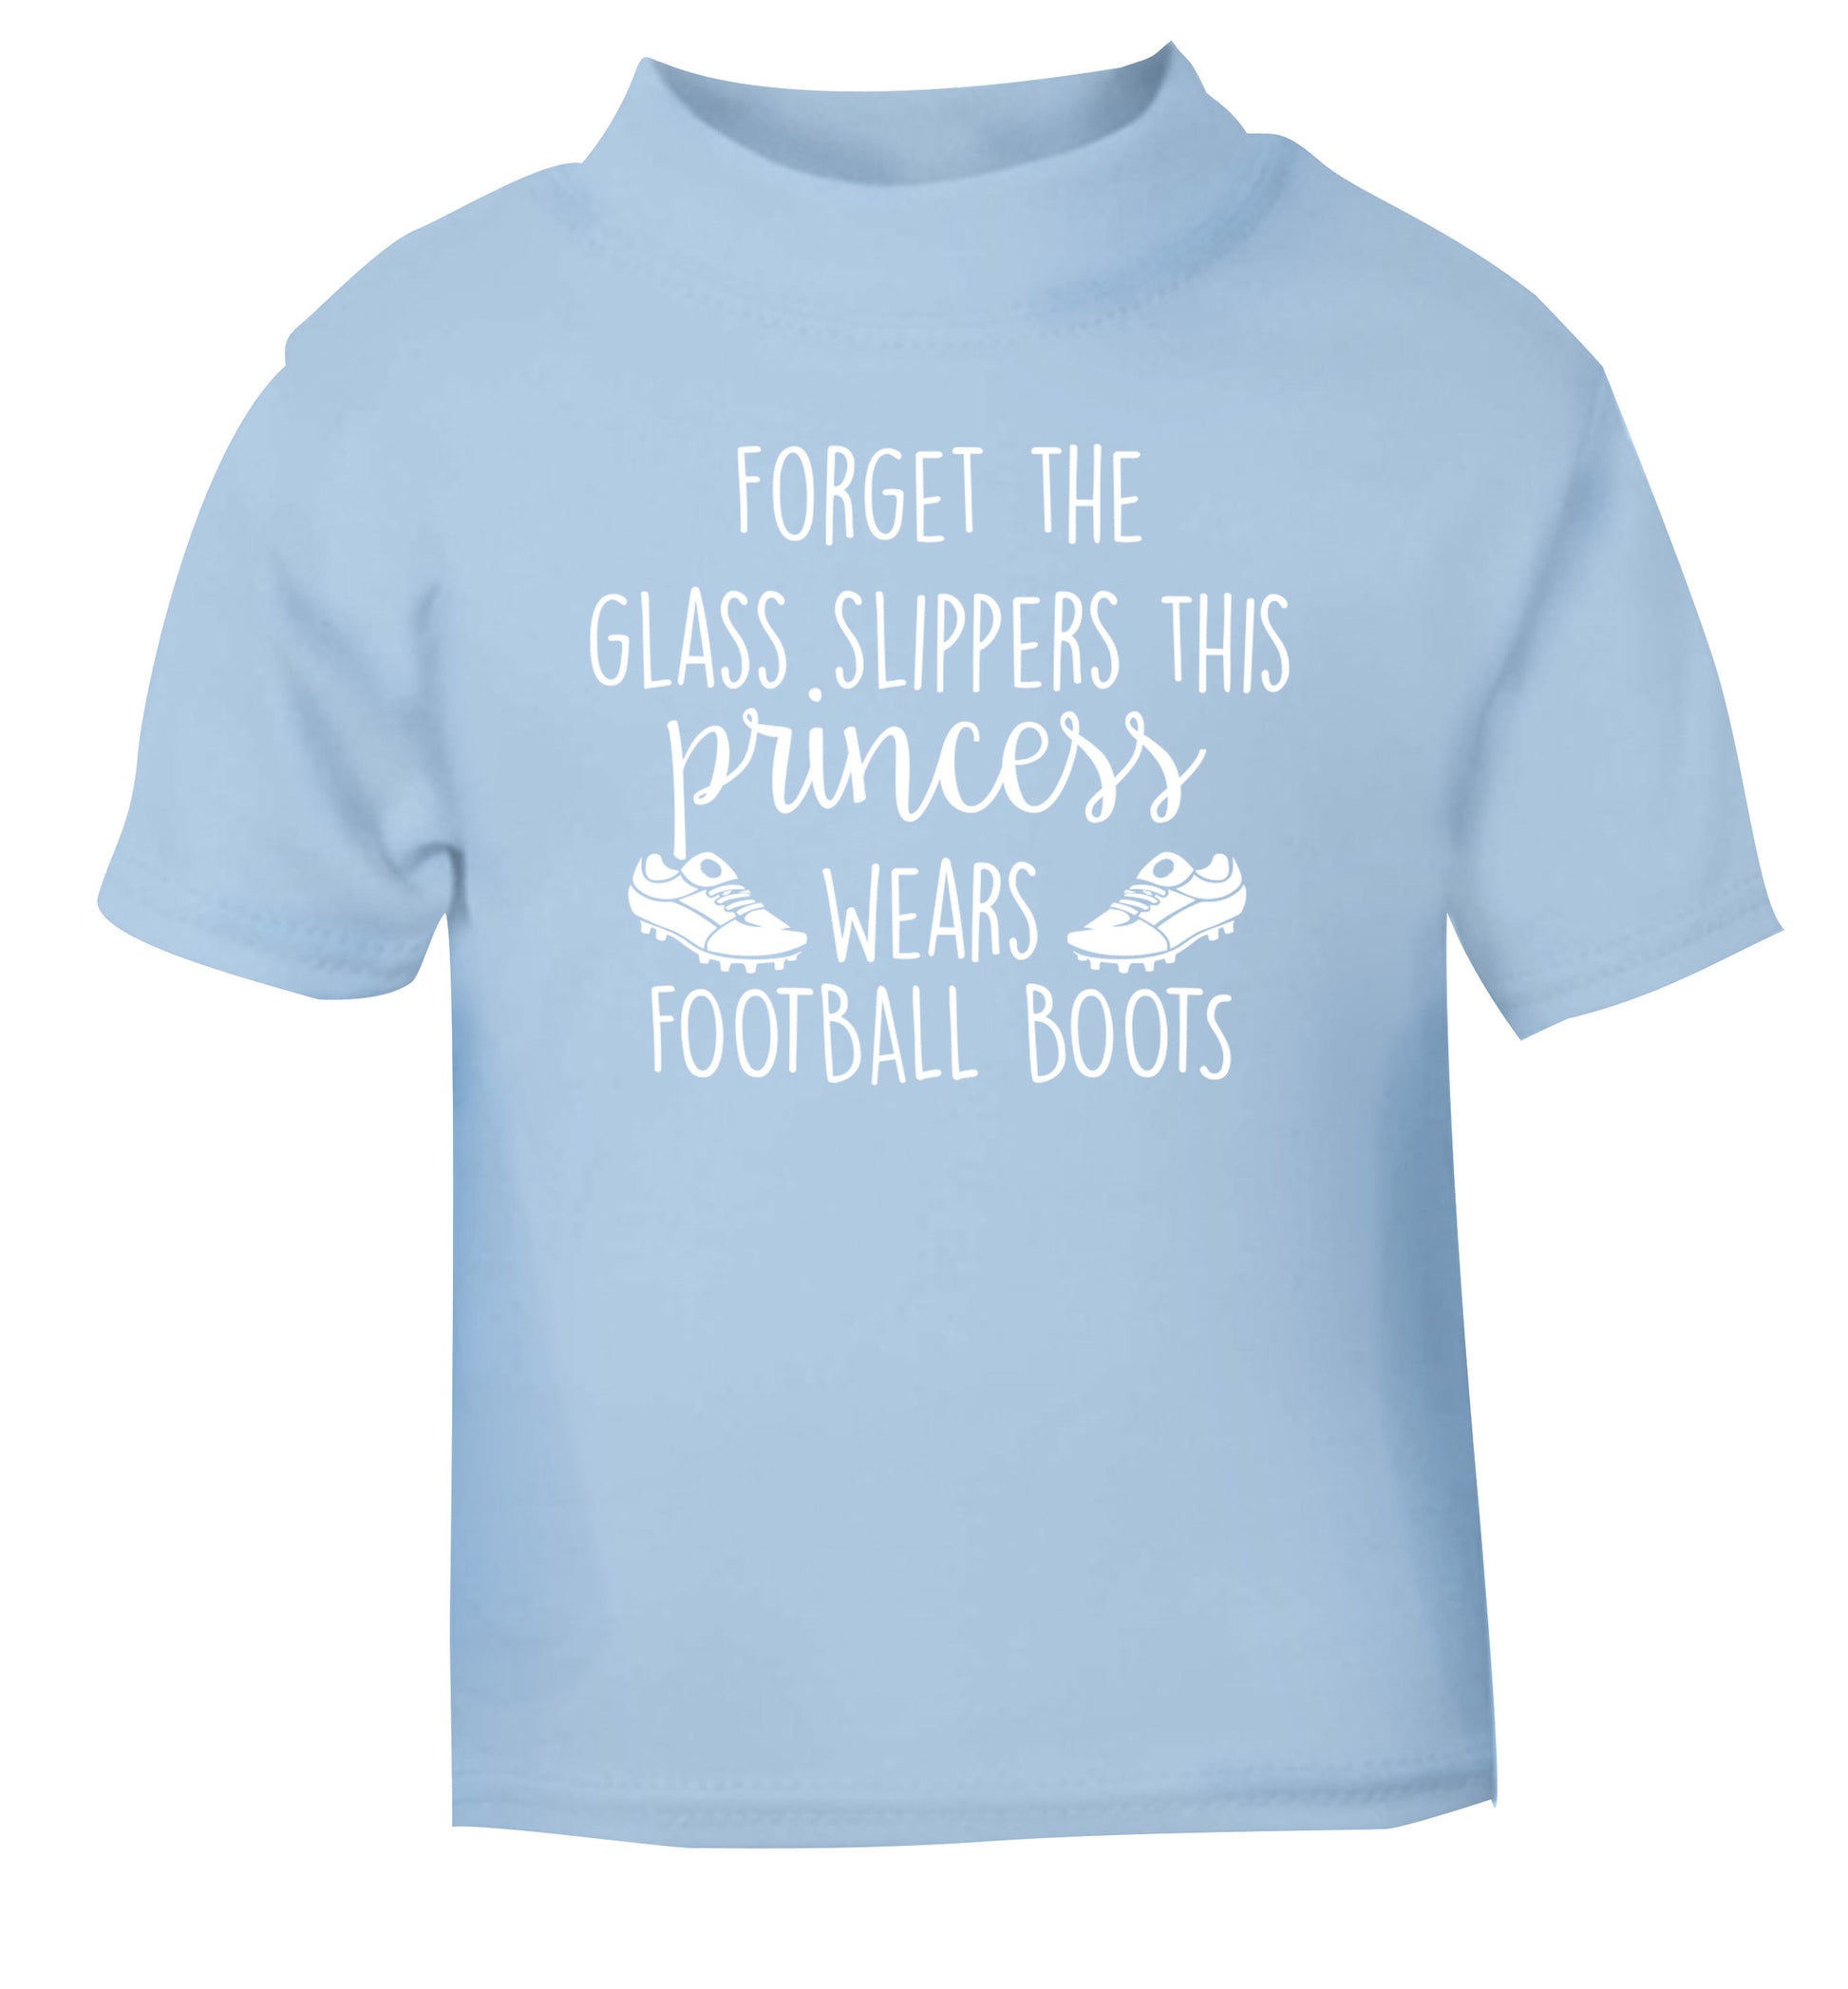 Forget the glass slippers this princess wears football boots light blue Baby Toddler Tshirt 2 Years